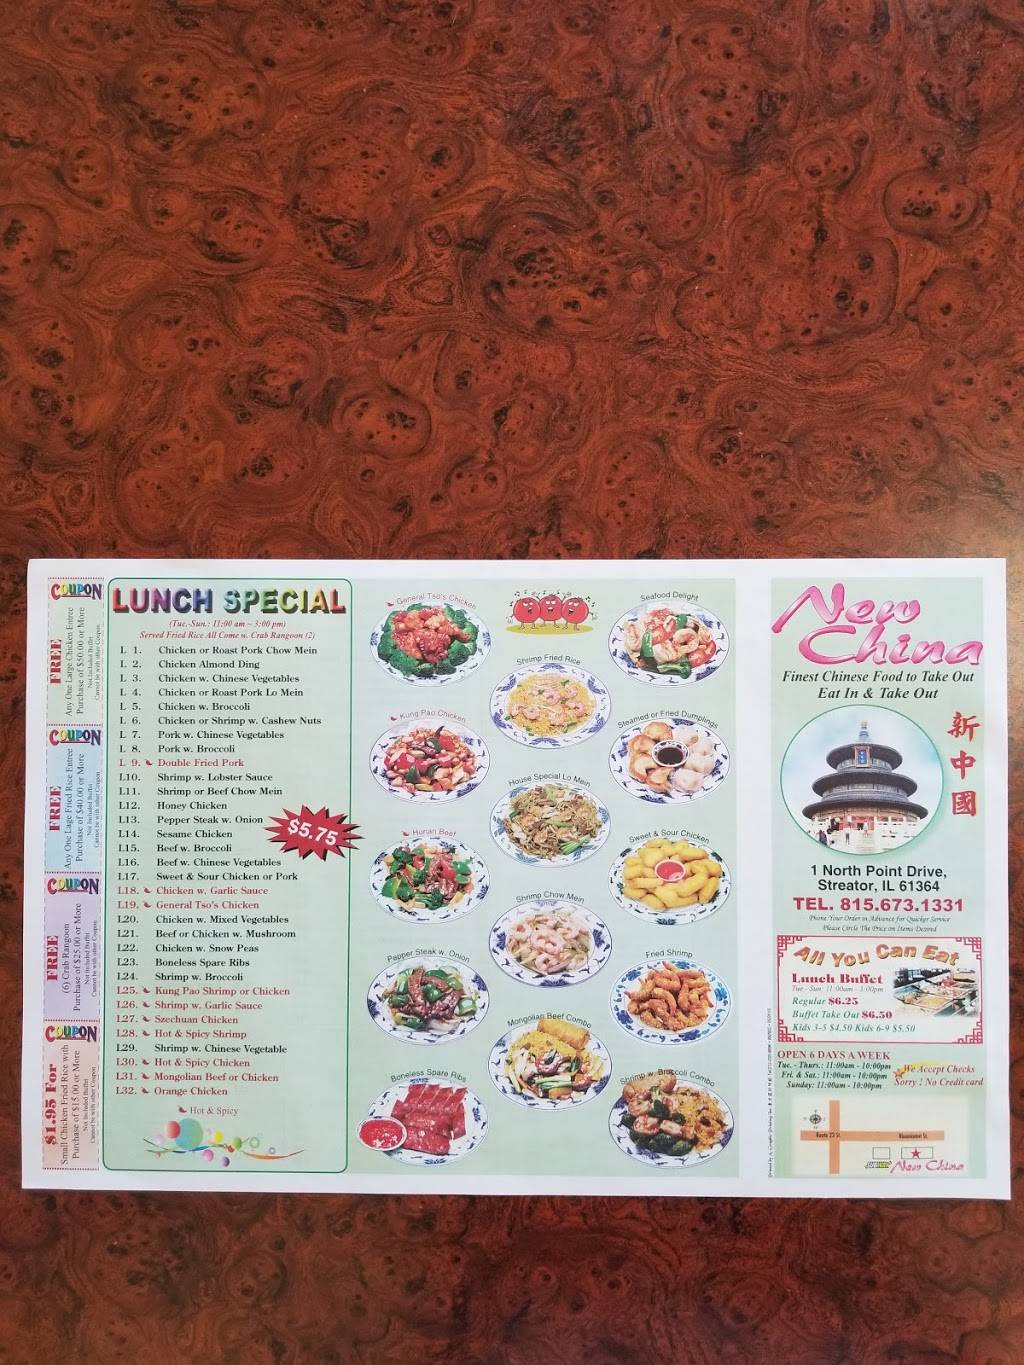 New China | restaurant | 1 Northpoint Dr, Streator, IL 61364, USA | 8156731331 OR +1 815-673-1331